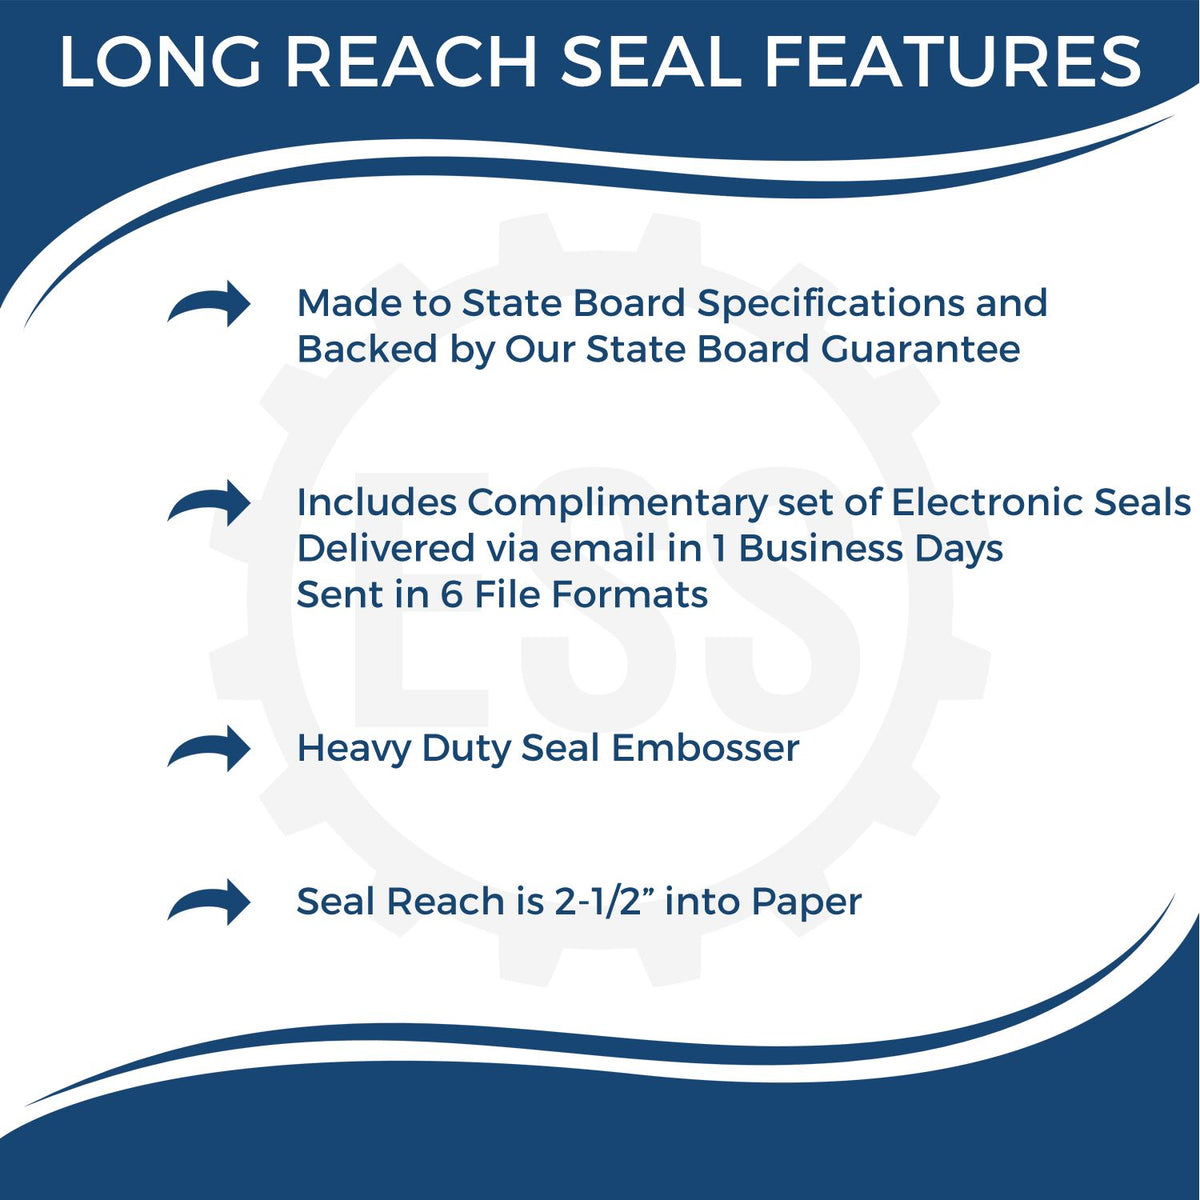 A picture of an infographic highlighting the selling points for the Long Reach Idaho Geology Seal